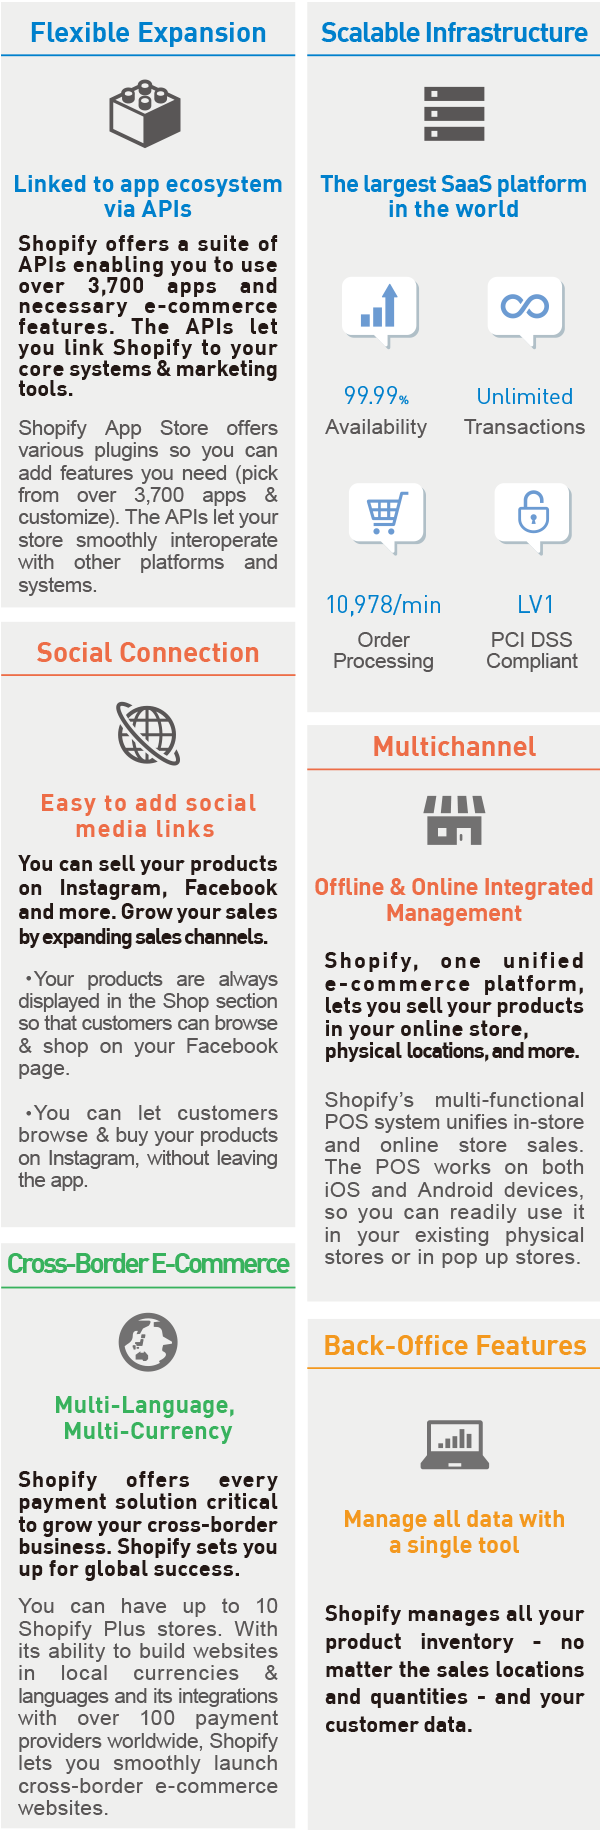 Flexible Expansion / Scalable Infrastructure / Social Connection / Multichannel / Back-Office Features / Cross-Border E-Commerce